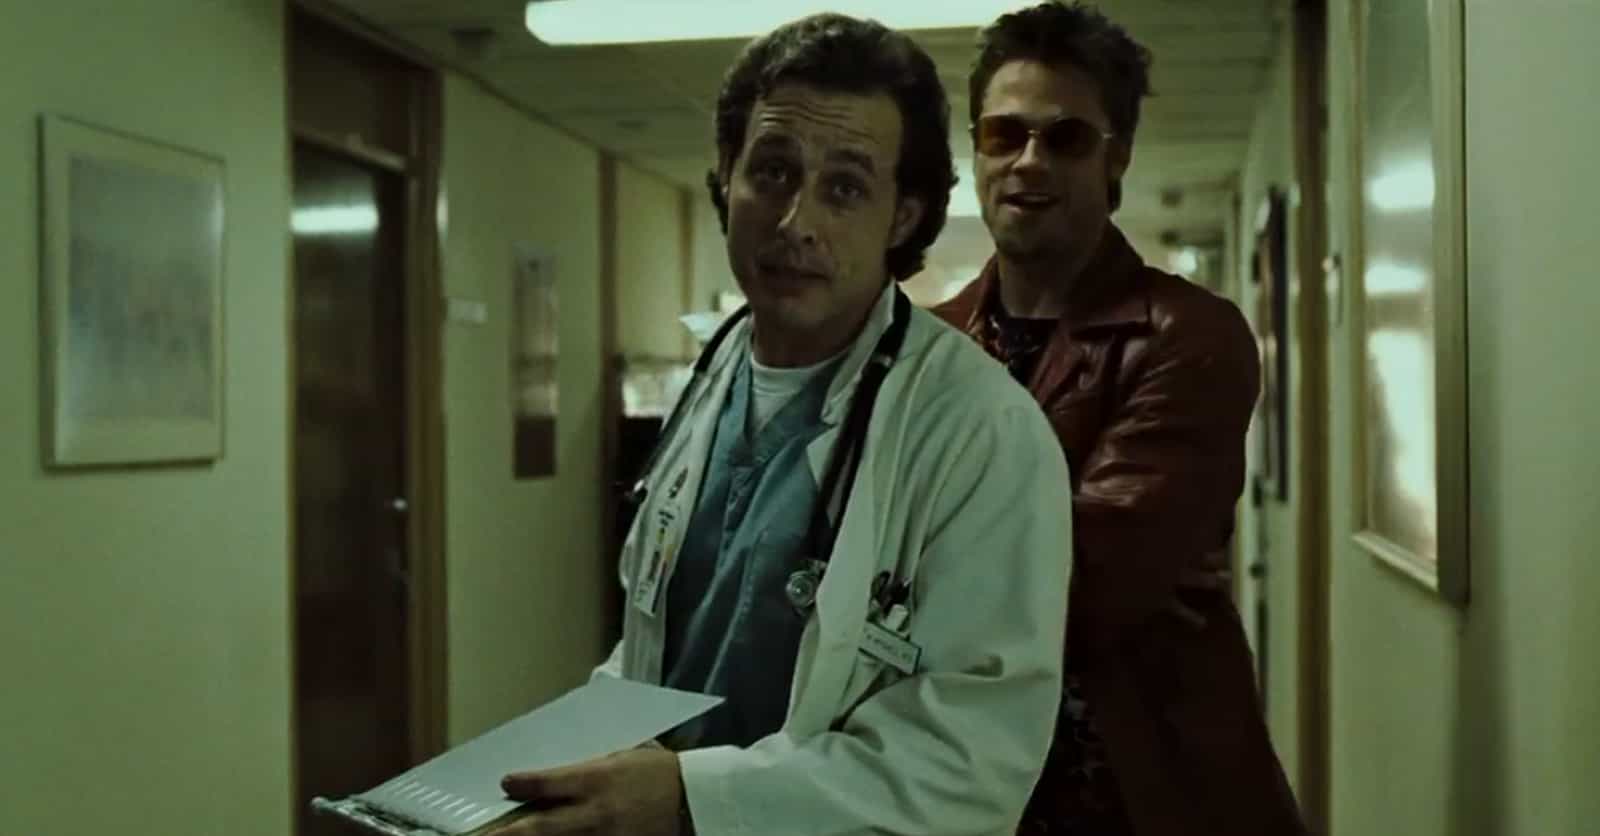 Little Details That Should've Made The Twist In 'Fight Club' Obvious